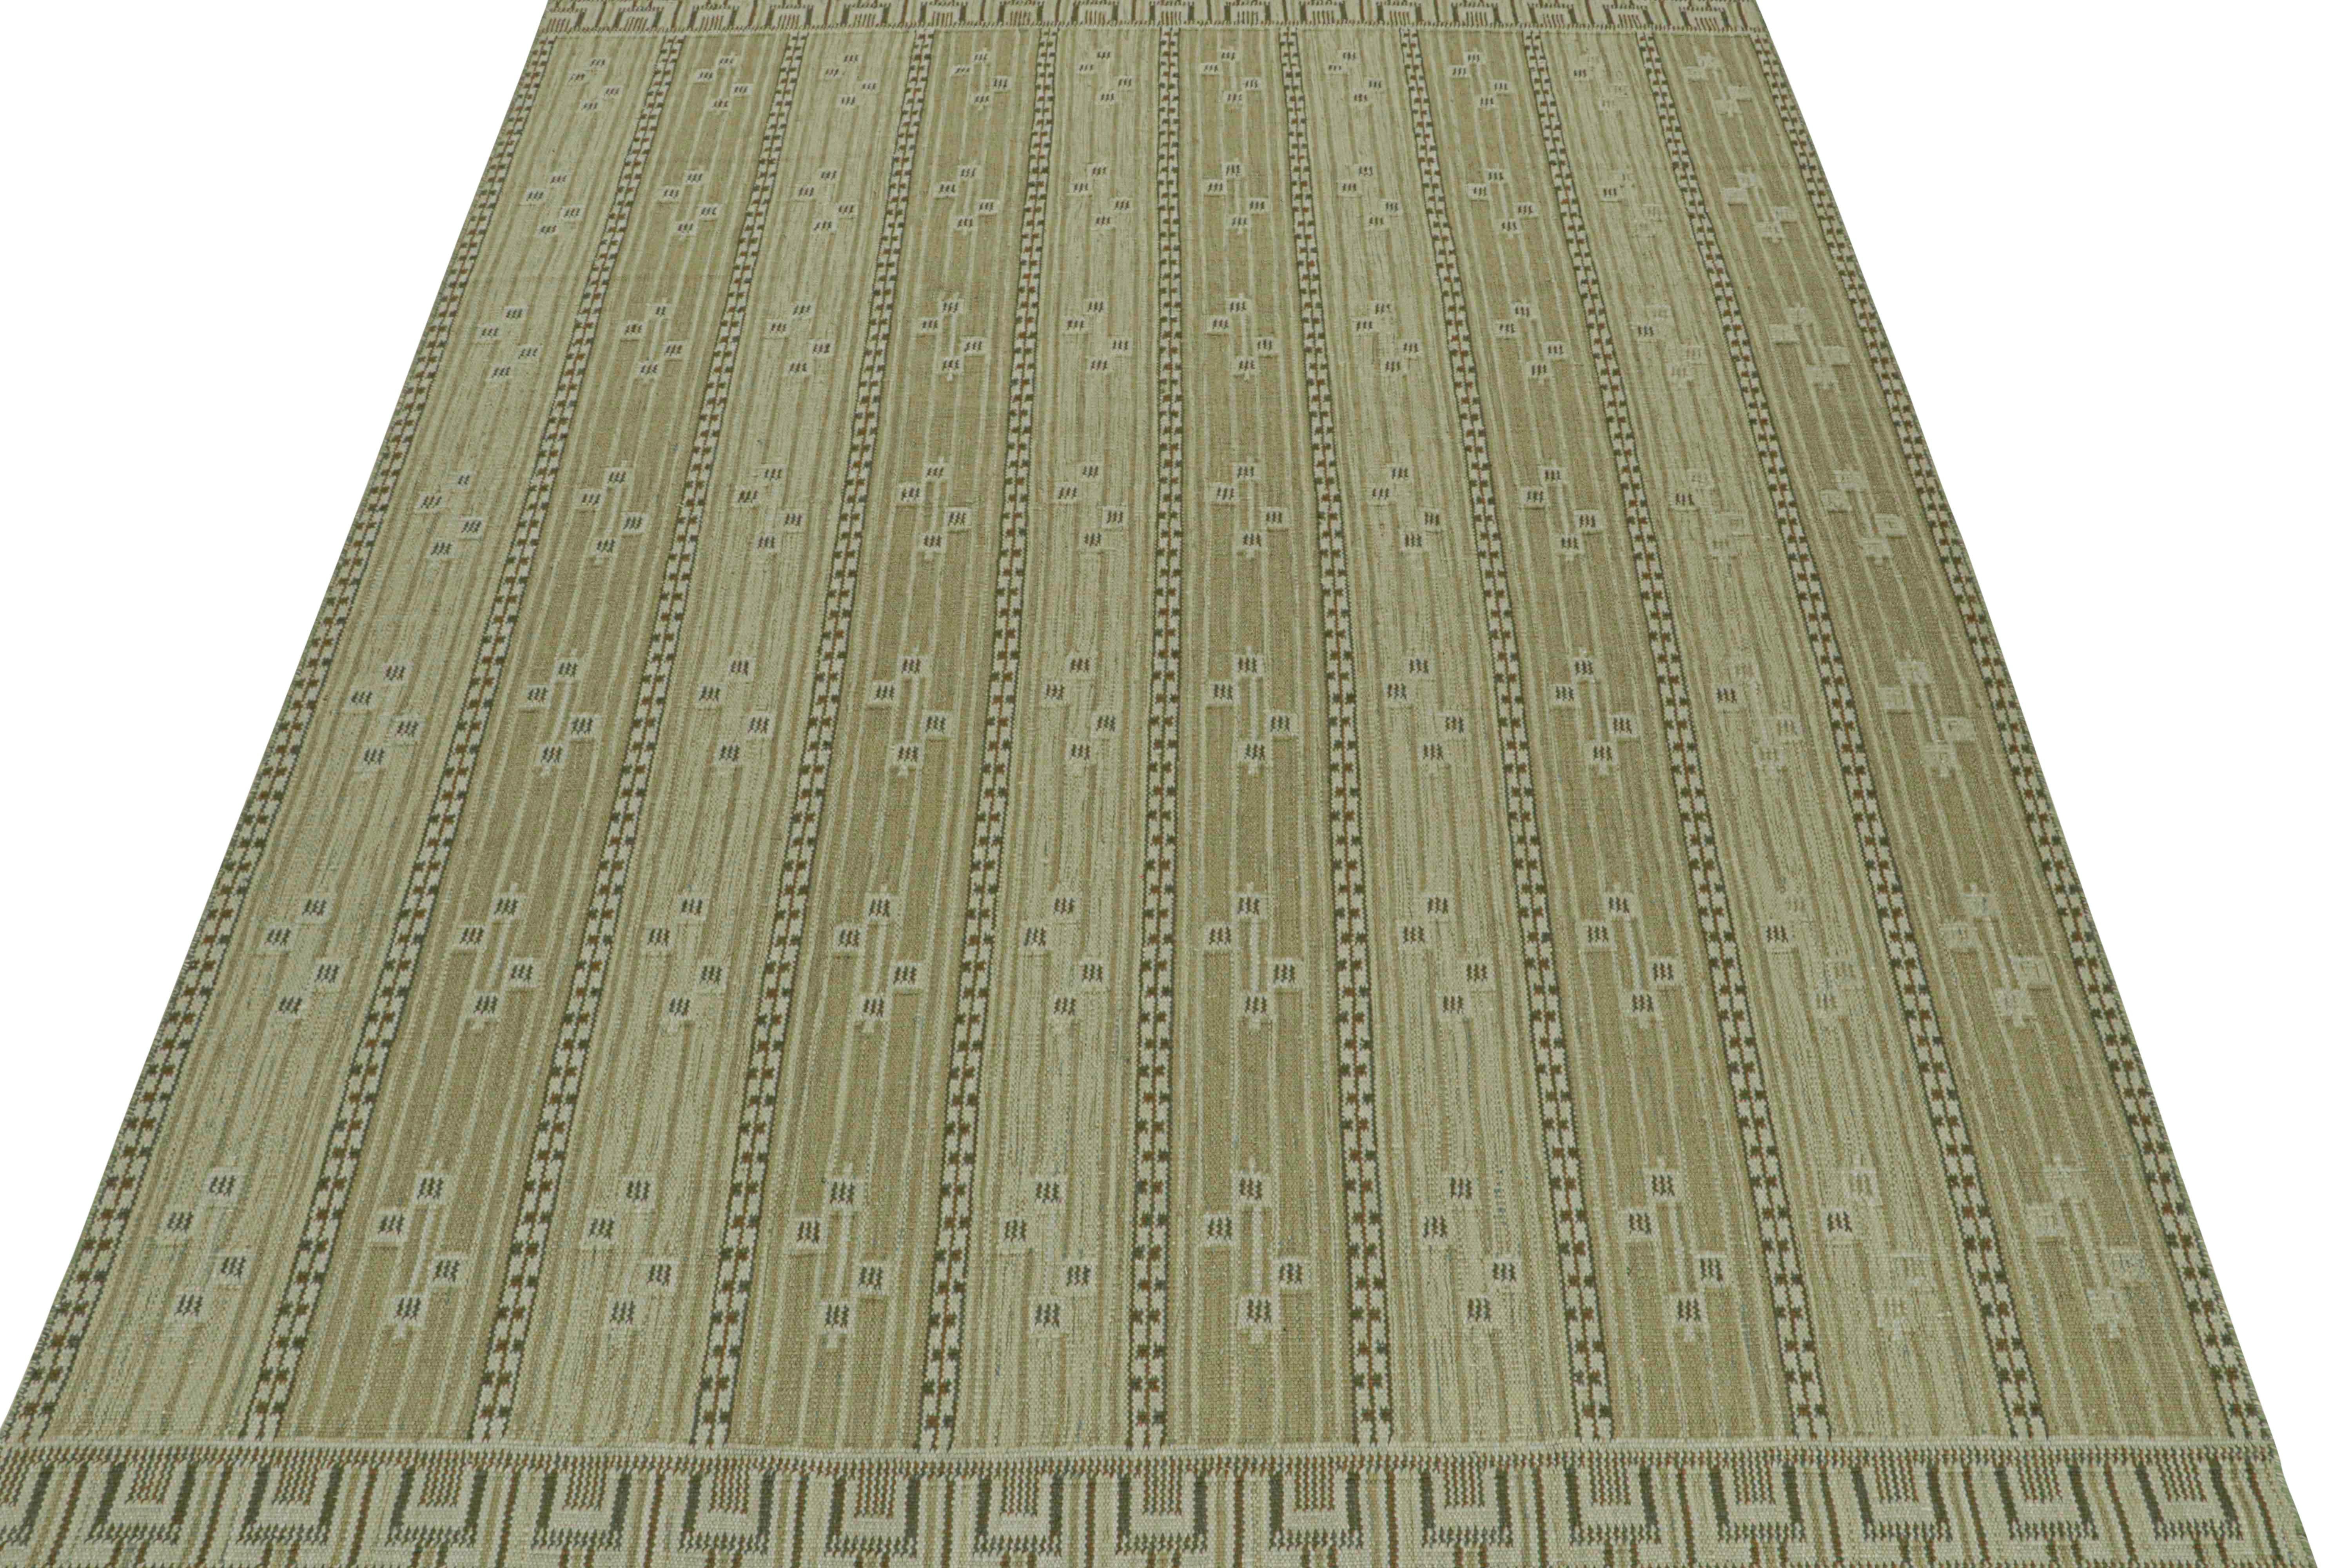 This custom flat weave design is a new addition to the Scandinavian Kilim collection by Rug & Kilim. Handwoven in wool and natural yarns, its design reflects a contemporary take on mid-century Rollakans and Swedish Deco style.

On the